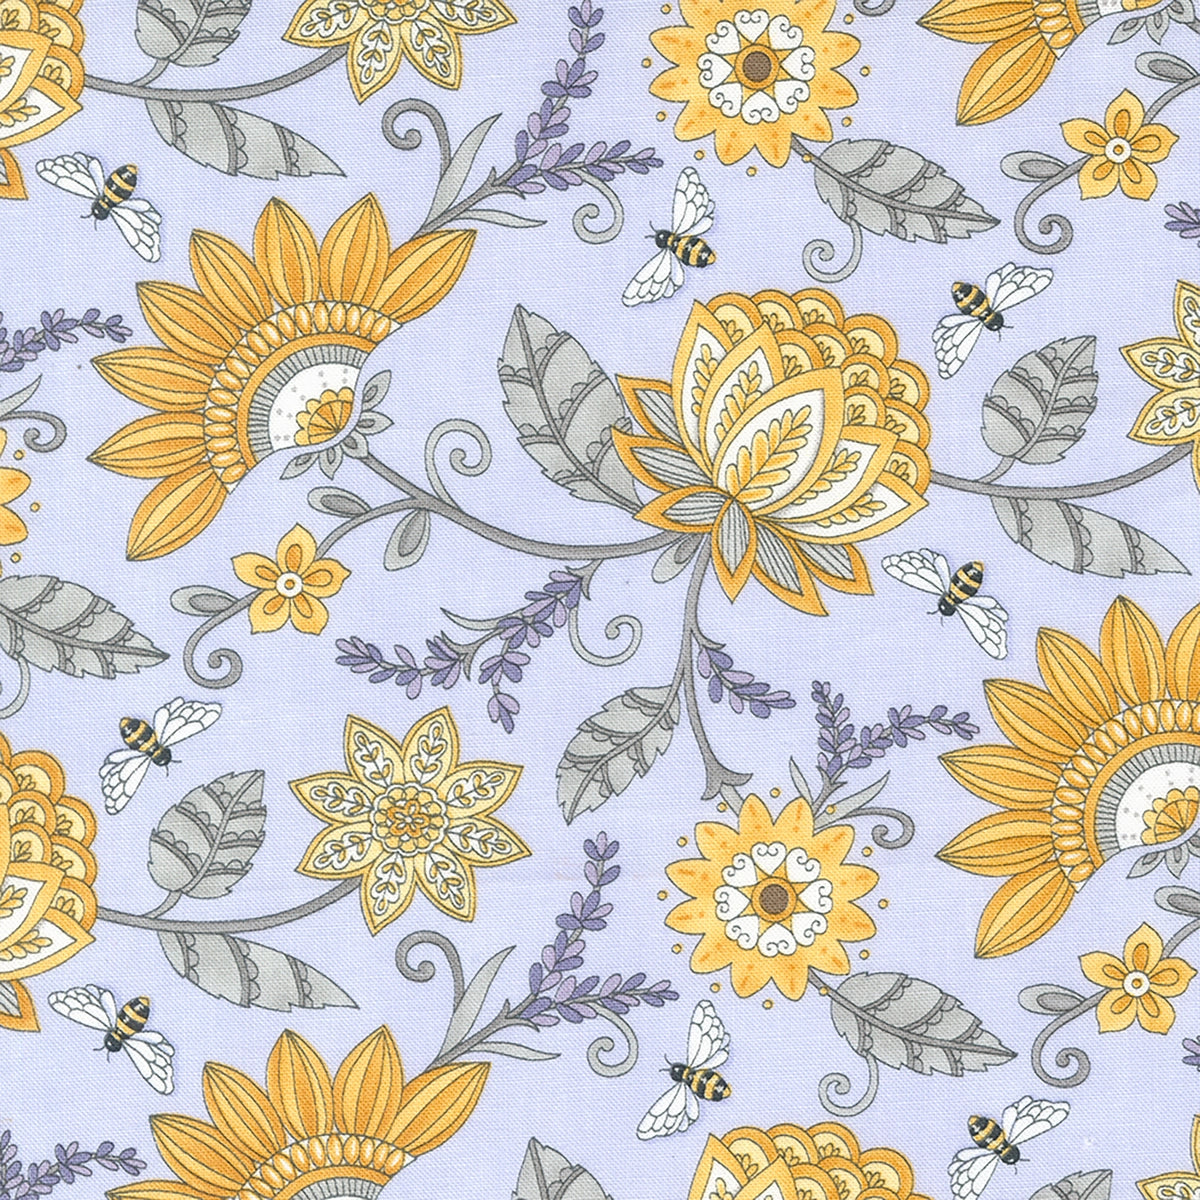 This collection is full of bees! With the Honey & Lavender fabric collection by Deb Strain for Moda Fabrics, transport yourself to a dreamy garden filled with buzzing bees and fragrant lavender fields. This fabric is a light lavender color with flowers and bees floating around. 